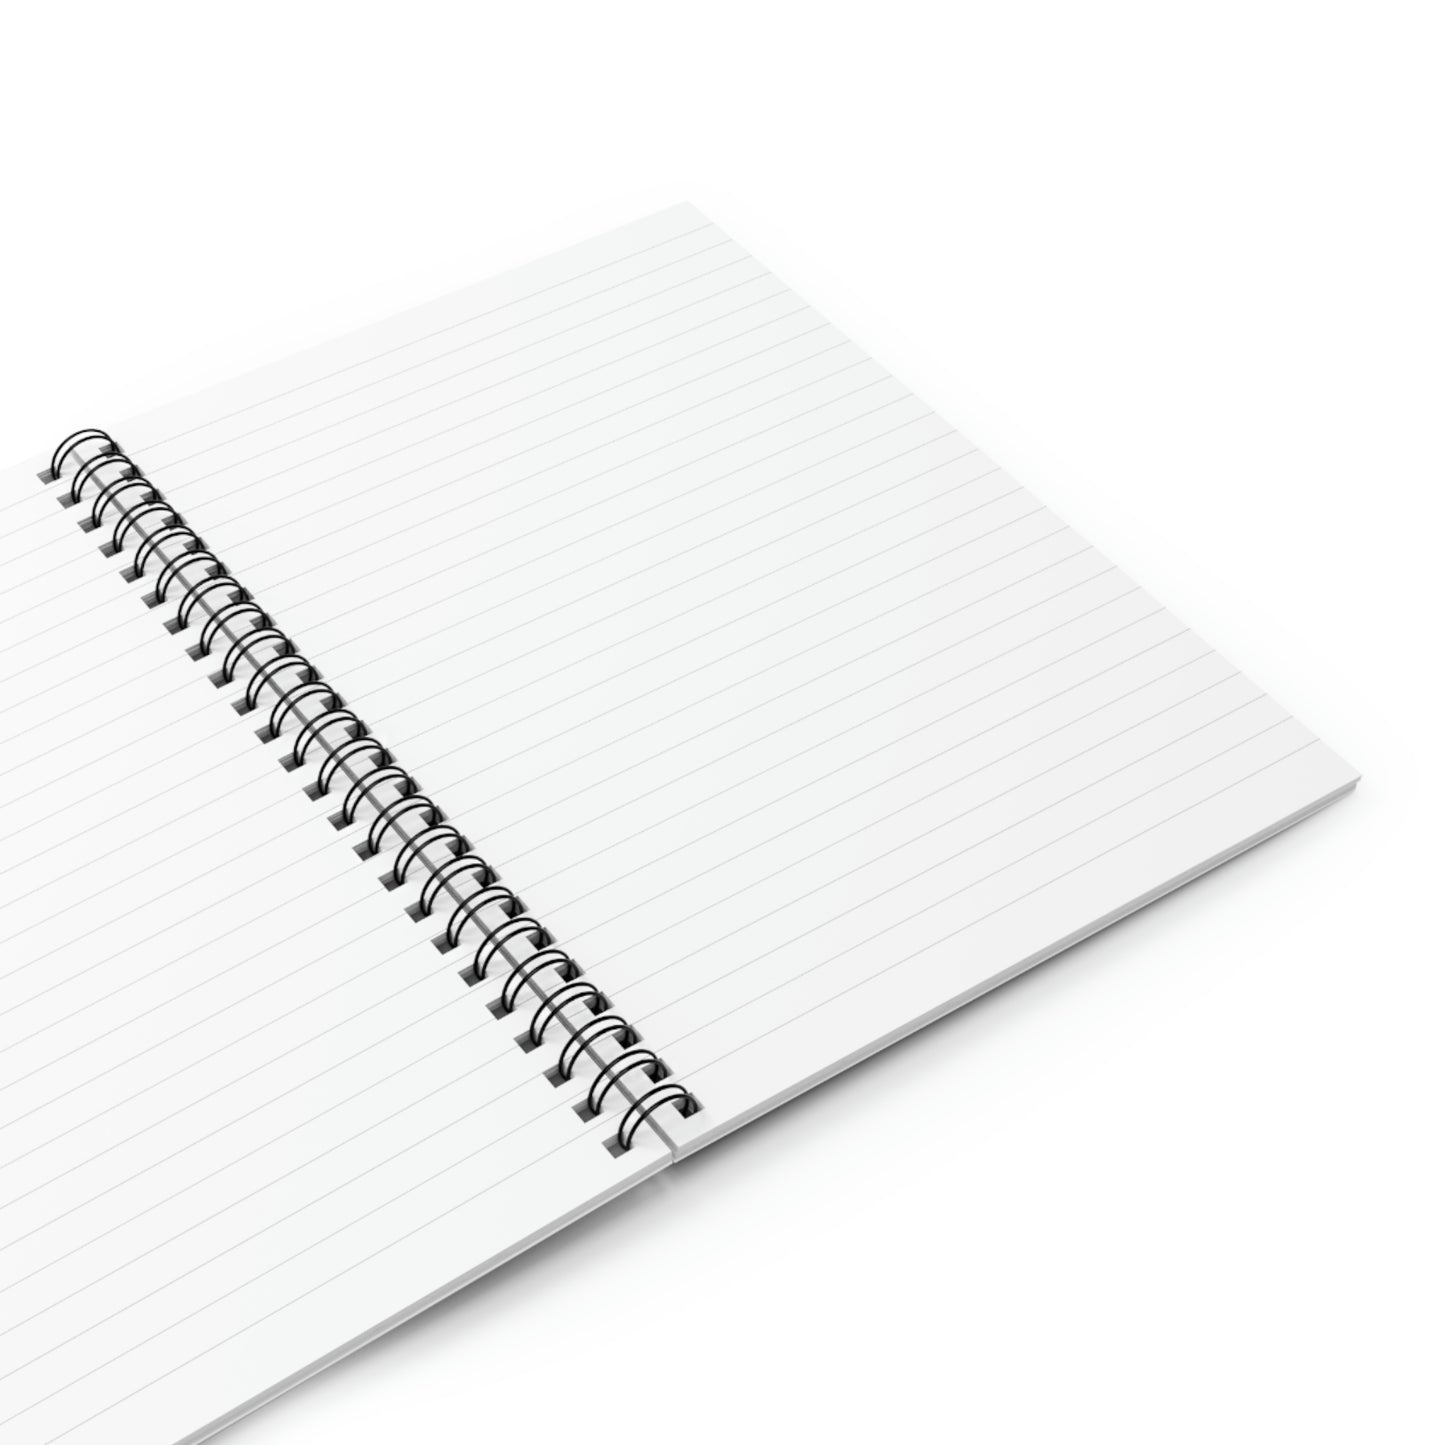 Official ISSA Spiral Notebook - Ruled Line